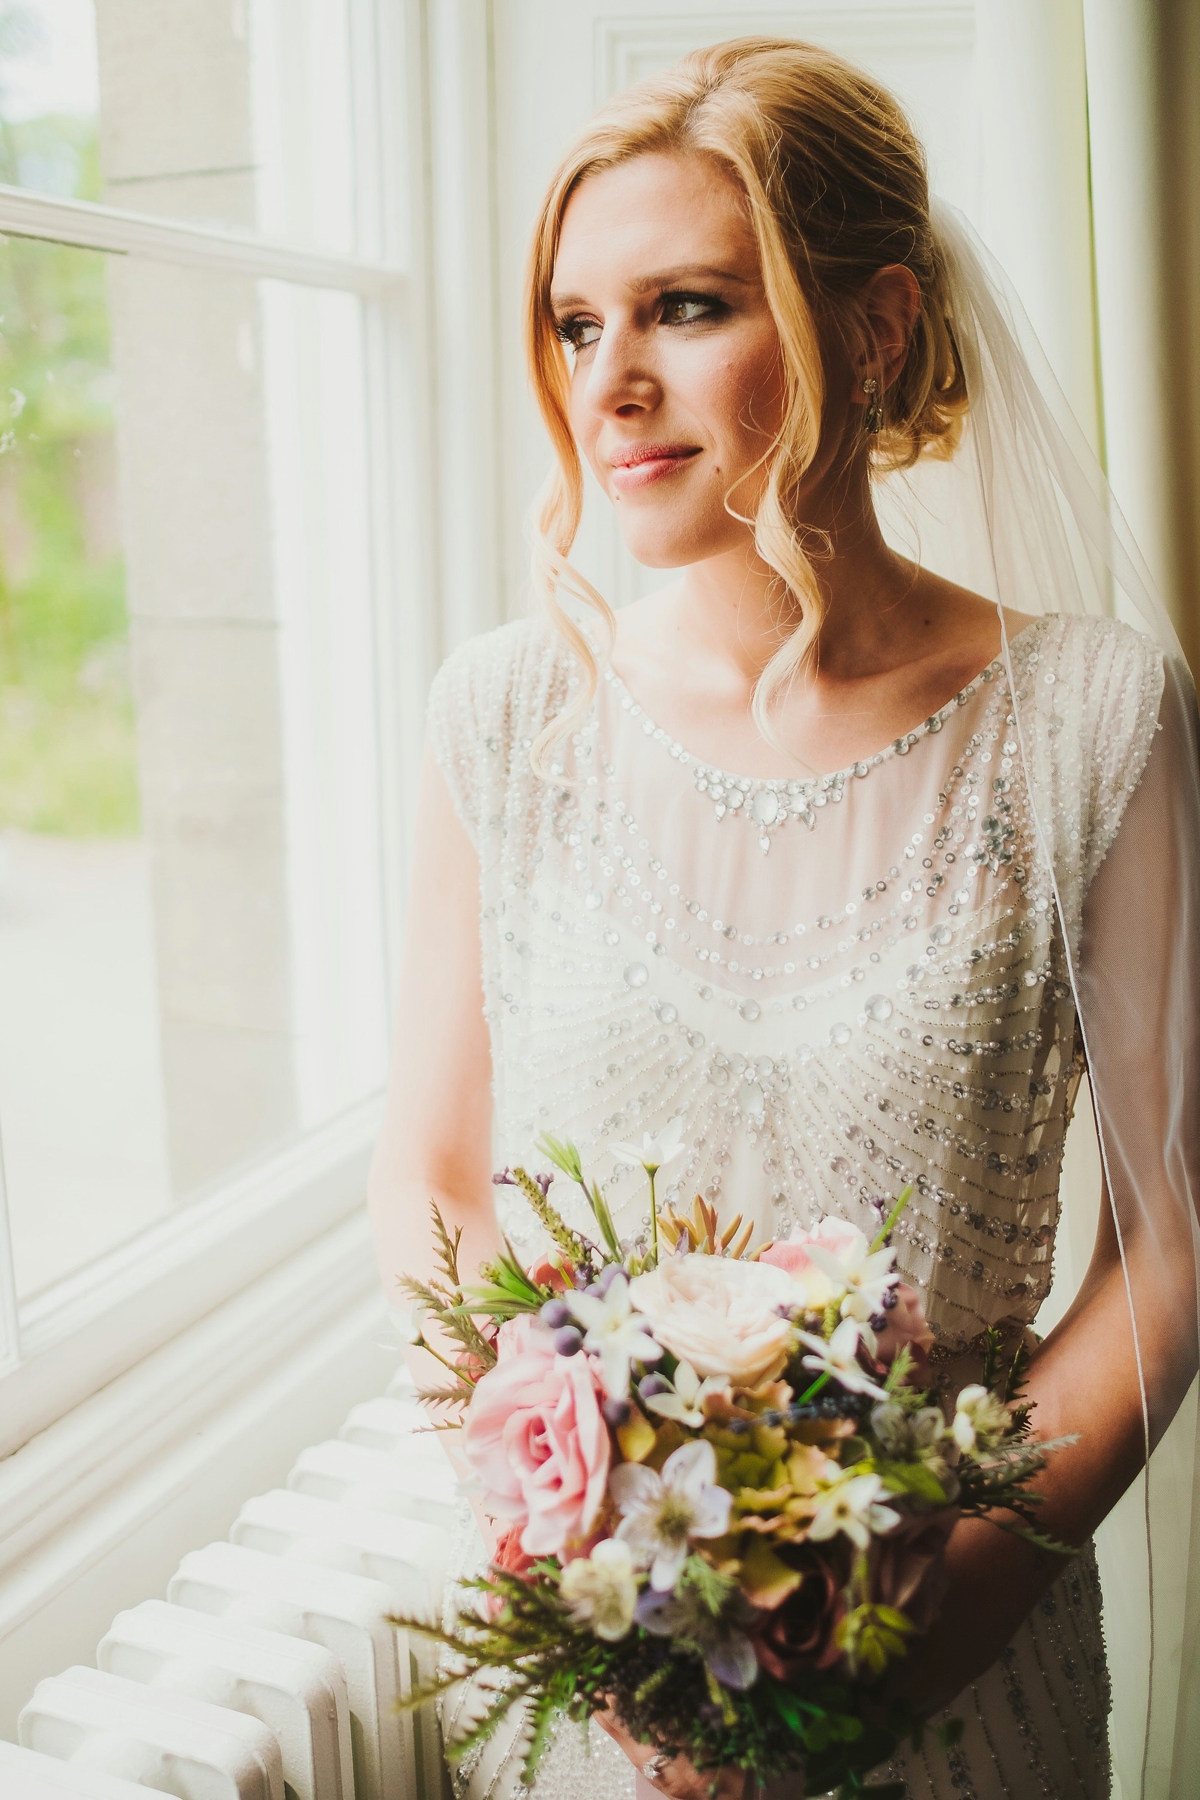 10 A Jenny Packham gown for a DIY wedding in the country